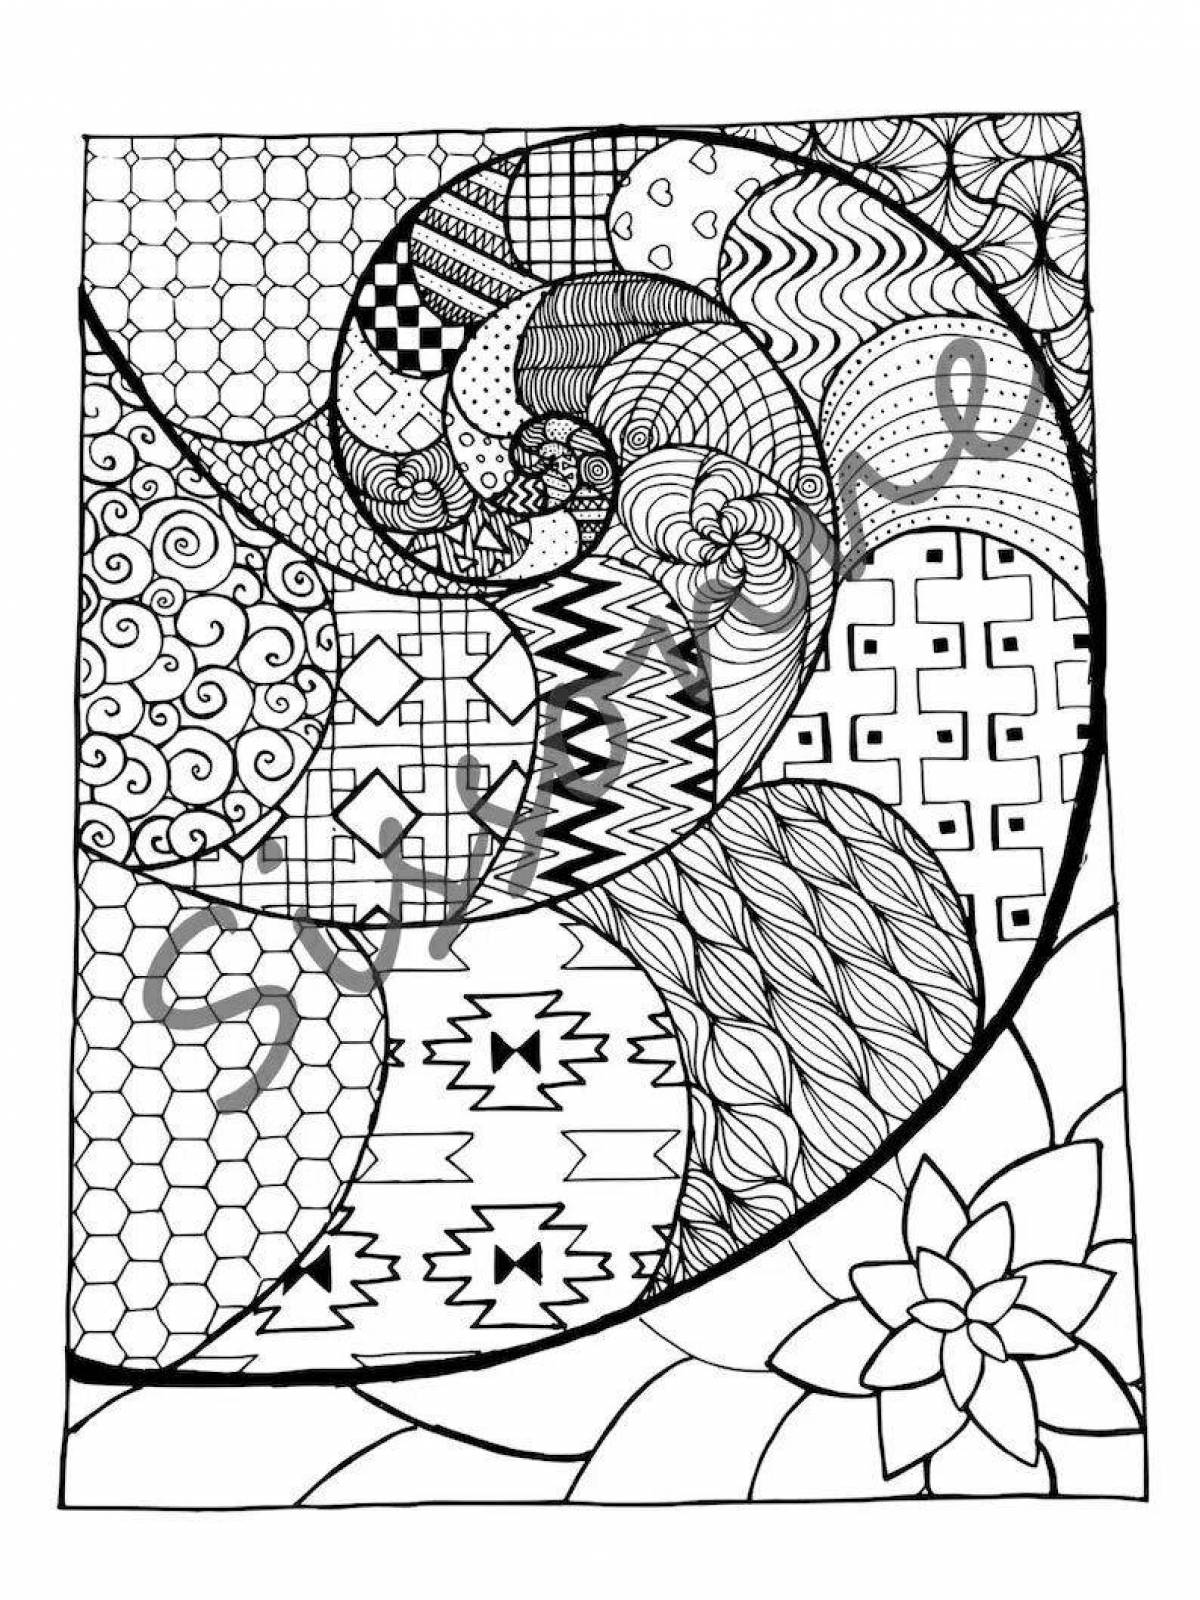 Coloring page funny spiral cat